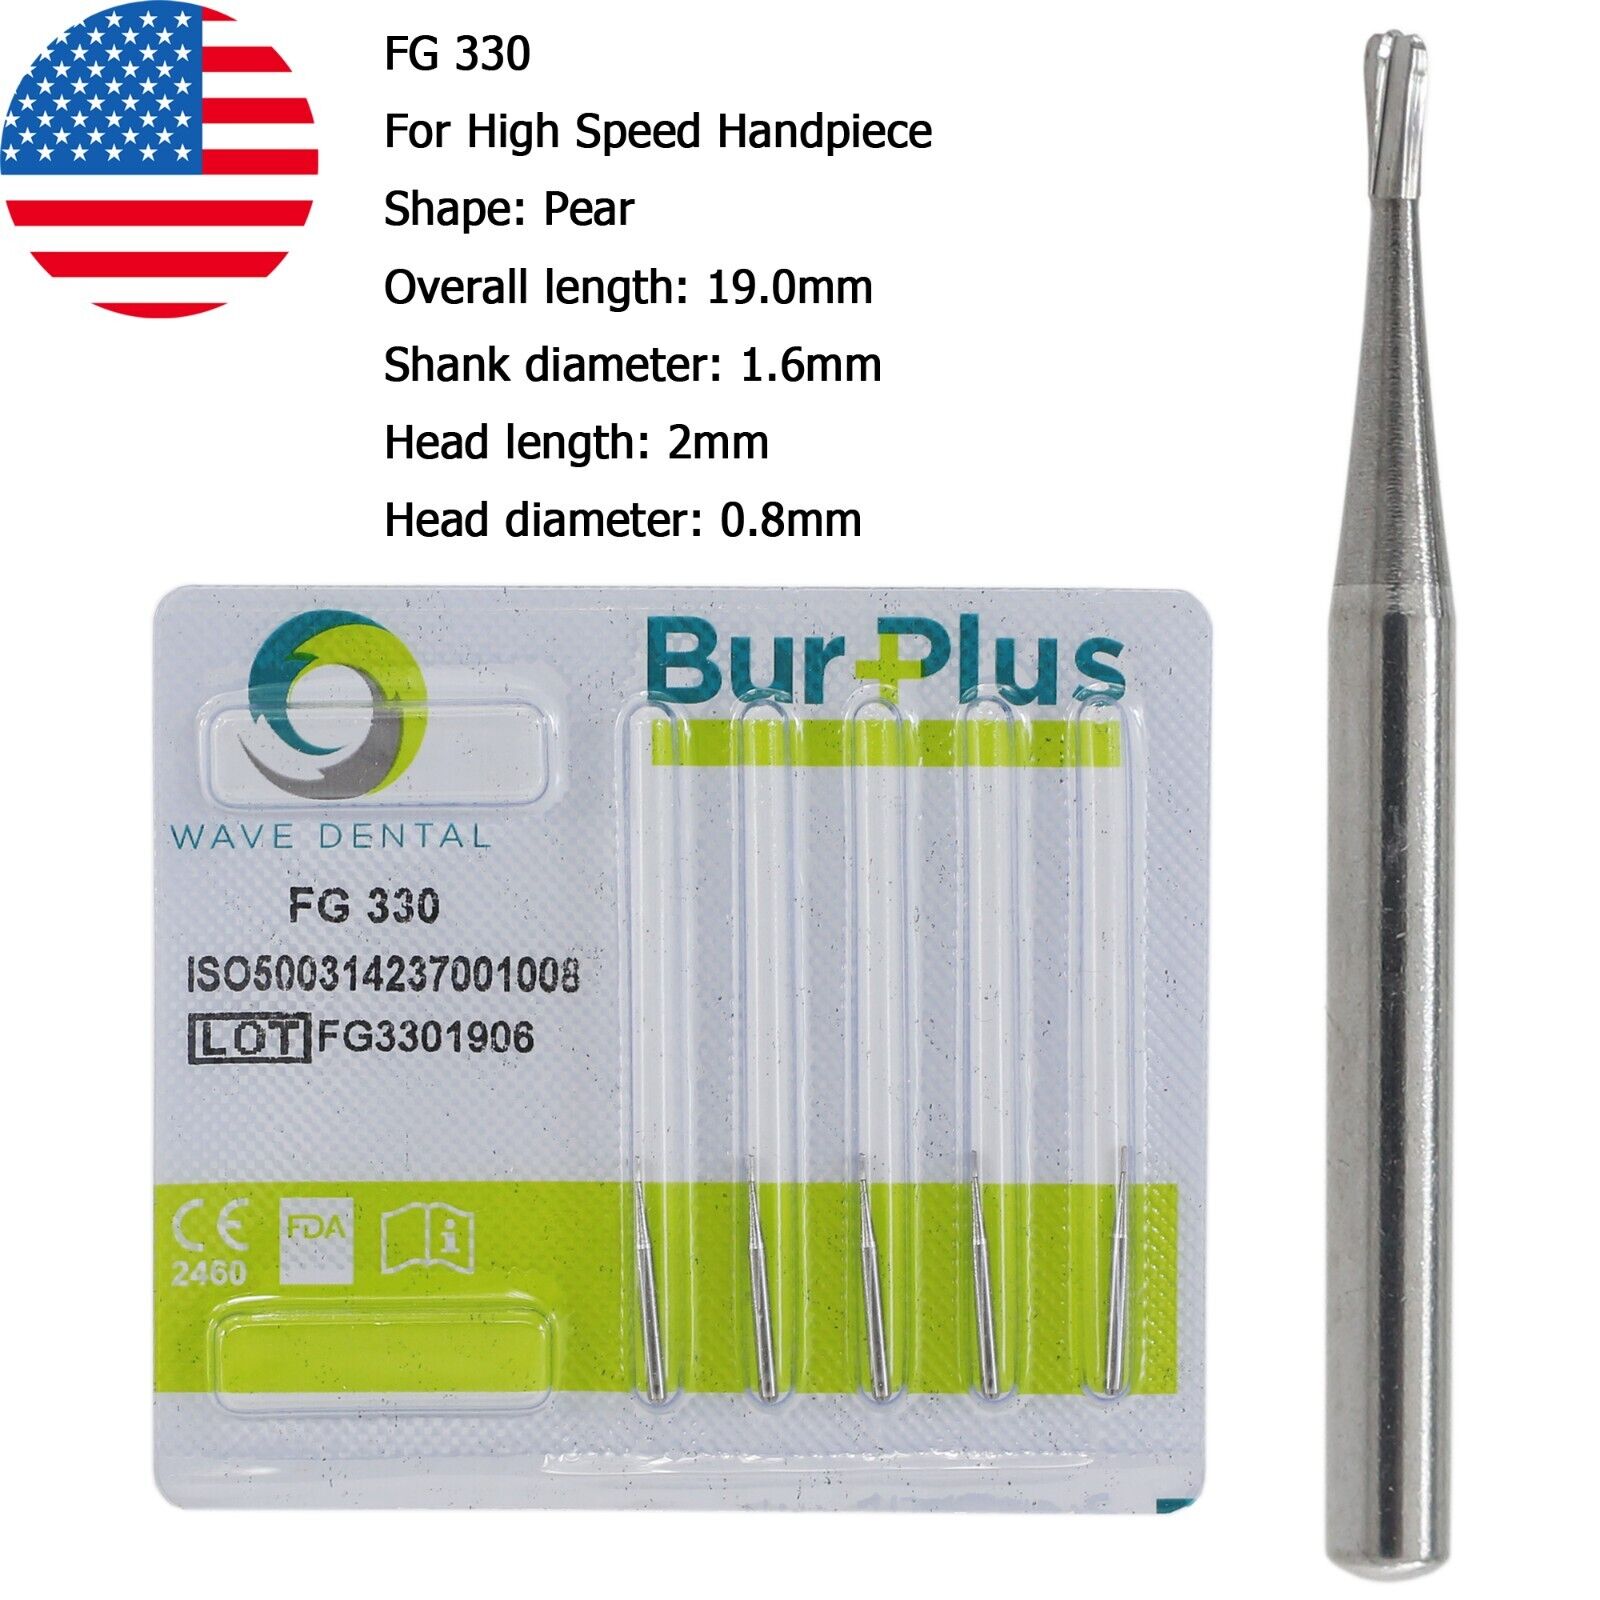 Wave Dental Carbide Burs FG 330 331 332 For High Speed Handpiece Pear Midwest